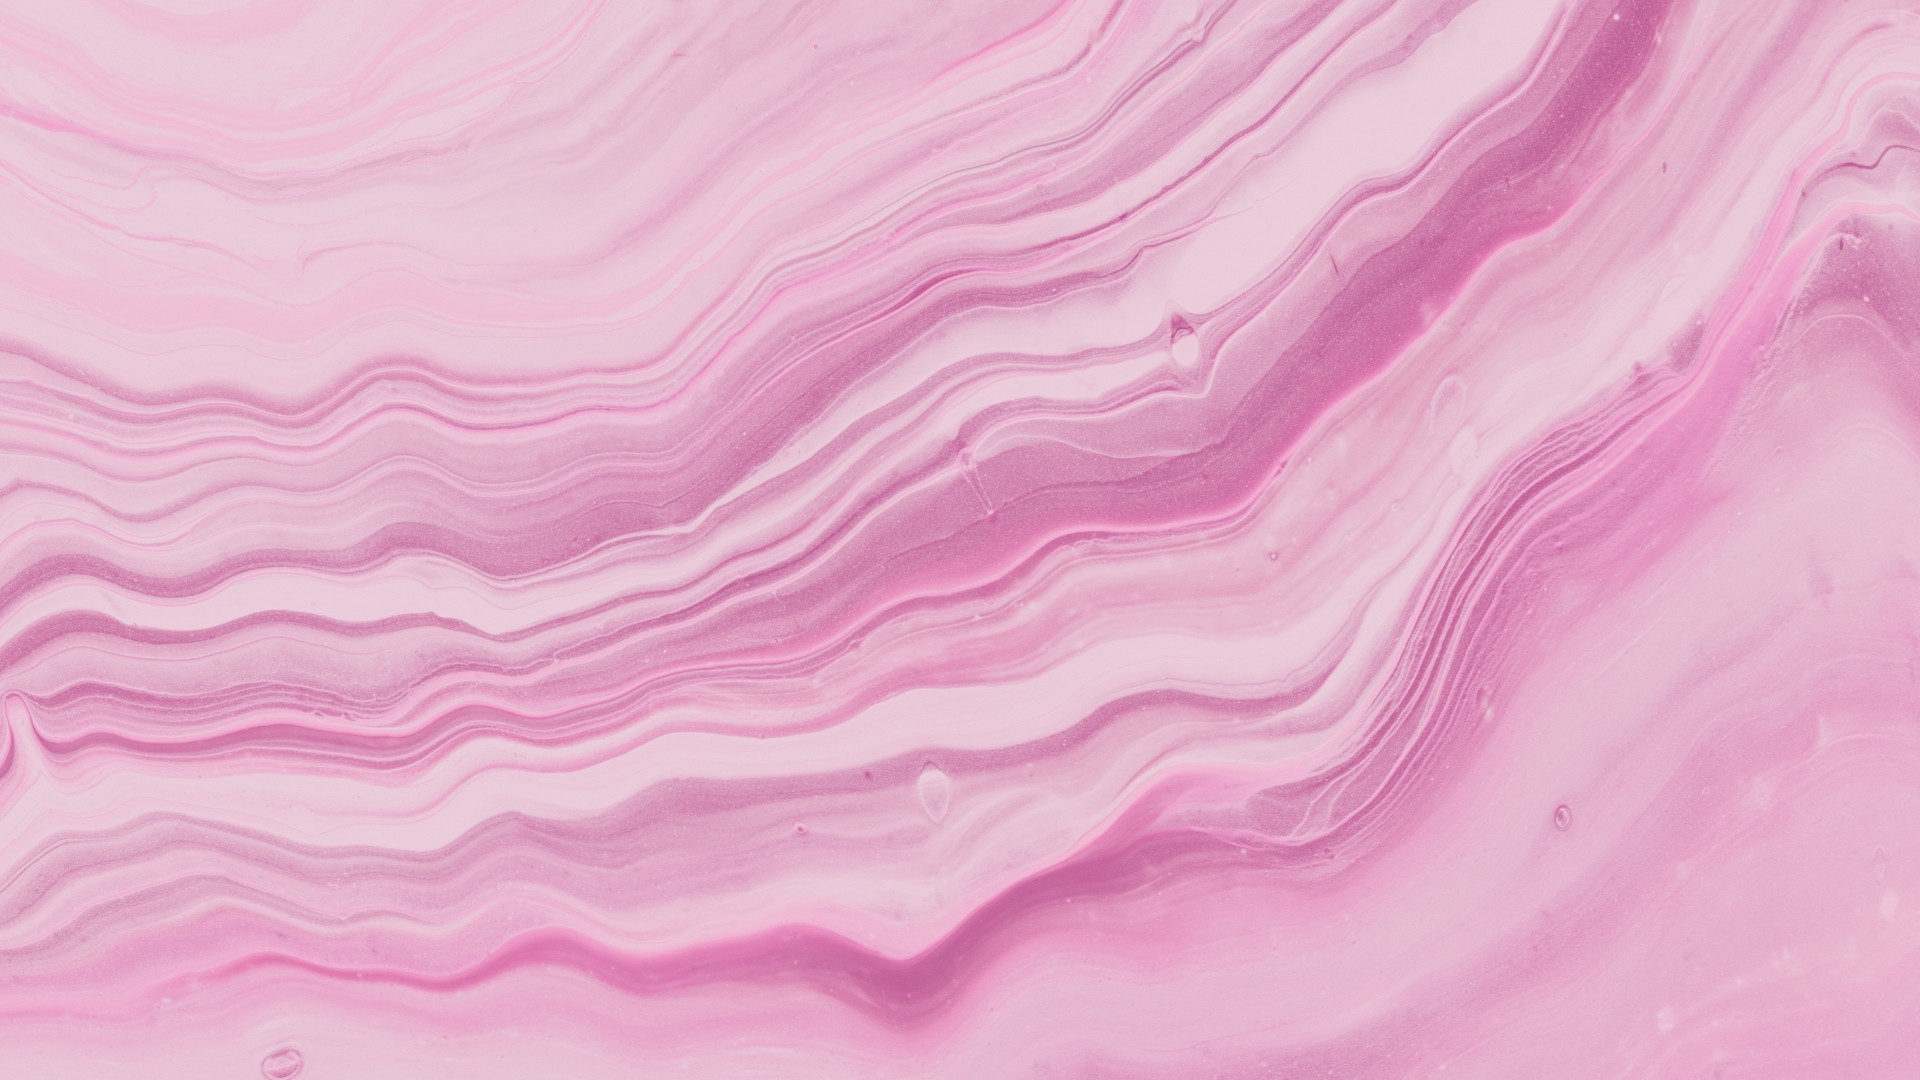 Abstract Paint Pink Layers 1080P Laptop Full HD Wallpaper, HD Abstract 4K Wallpaper, Image, Photo and Background